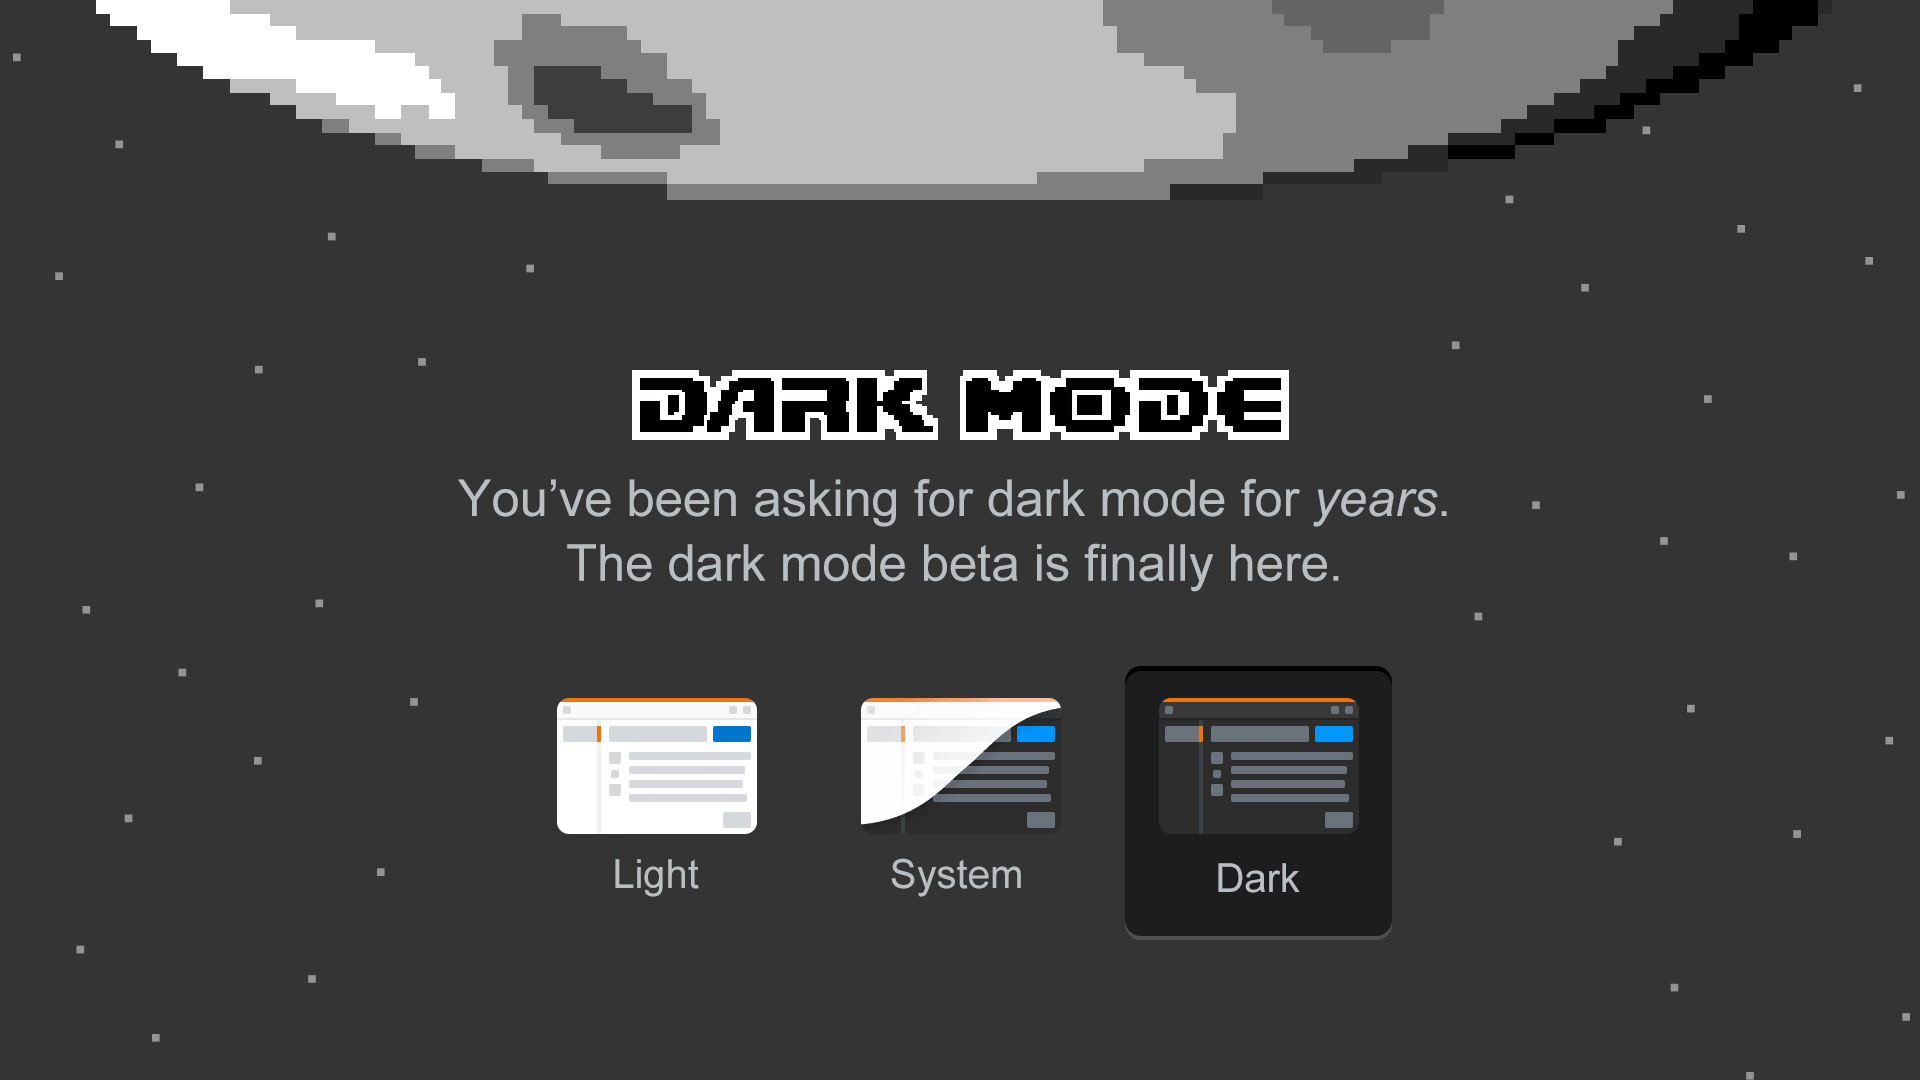 css - How to get dark themed addressbar search-results - Stack Overflow